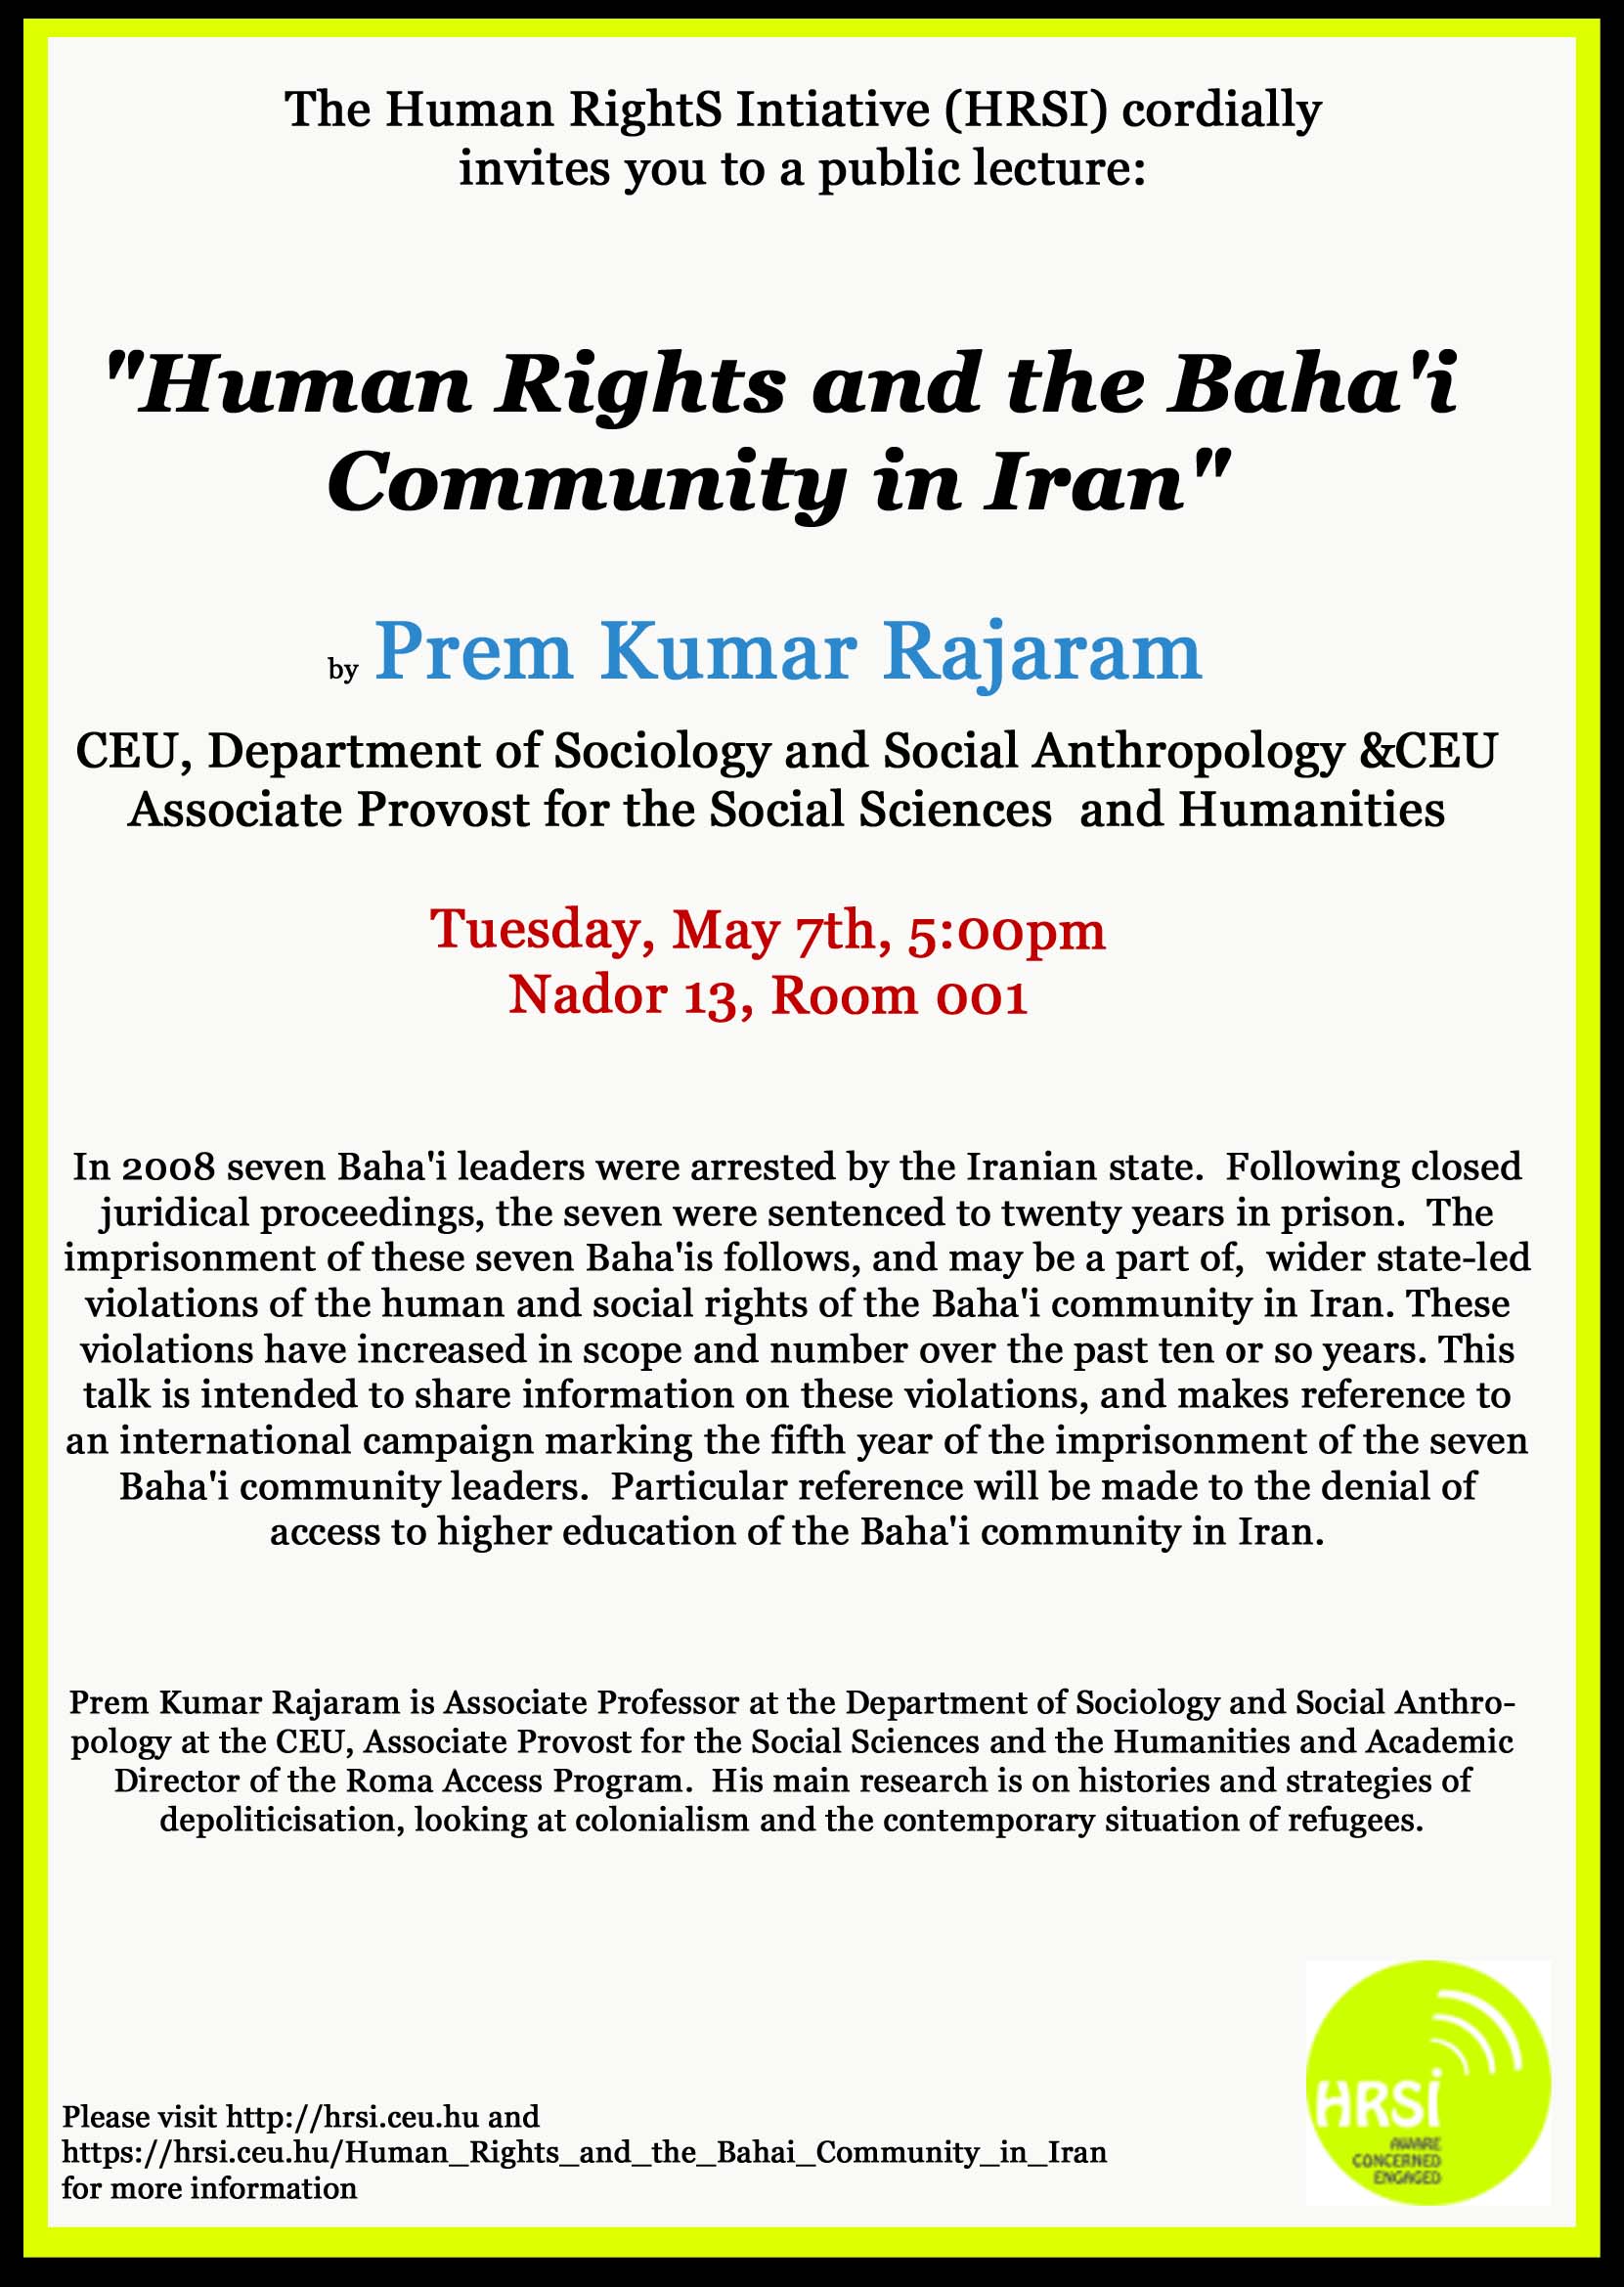 Lecture on Human Rights in Iran at CEU © Human RightS Initiative (HRSI)